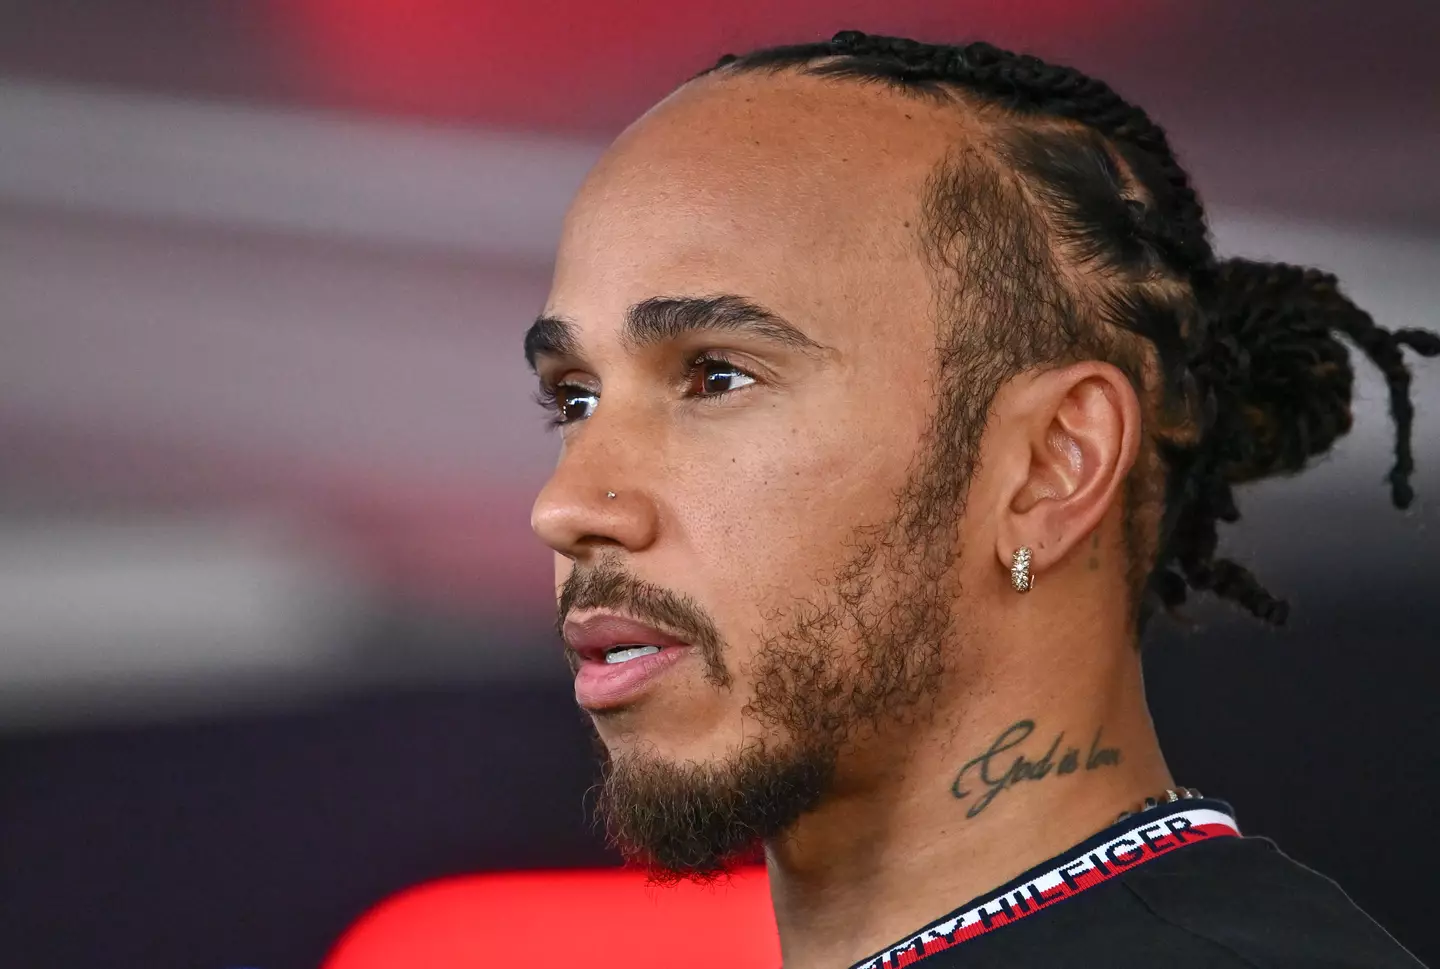 Hamilton has appeared to refuse to sign helmets. (Vince Mignott/MB Media/Getty Images)